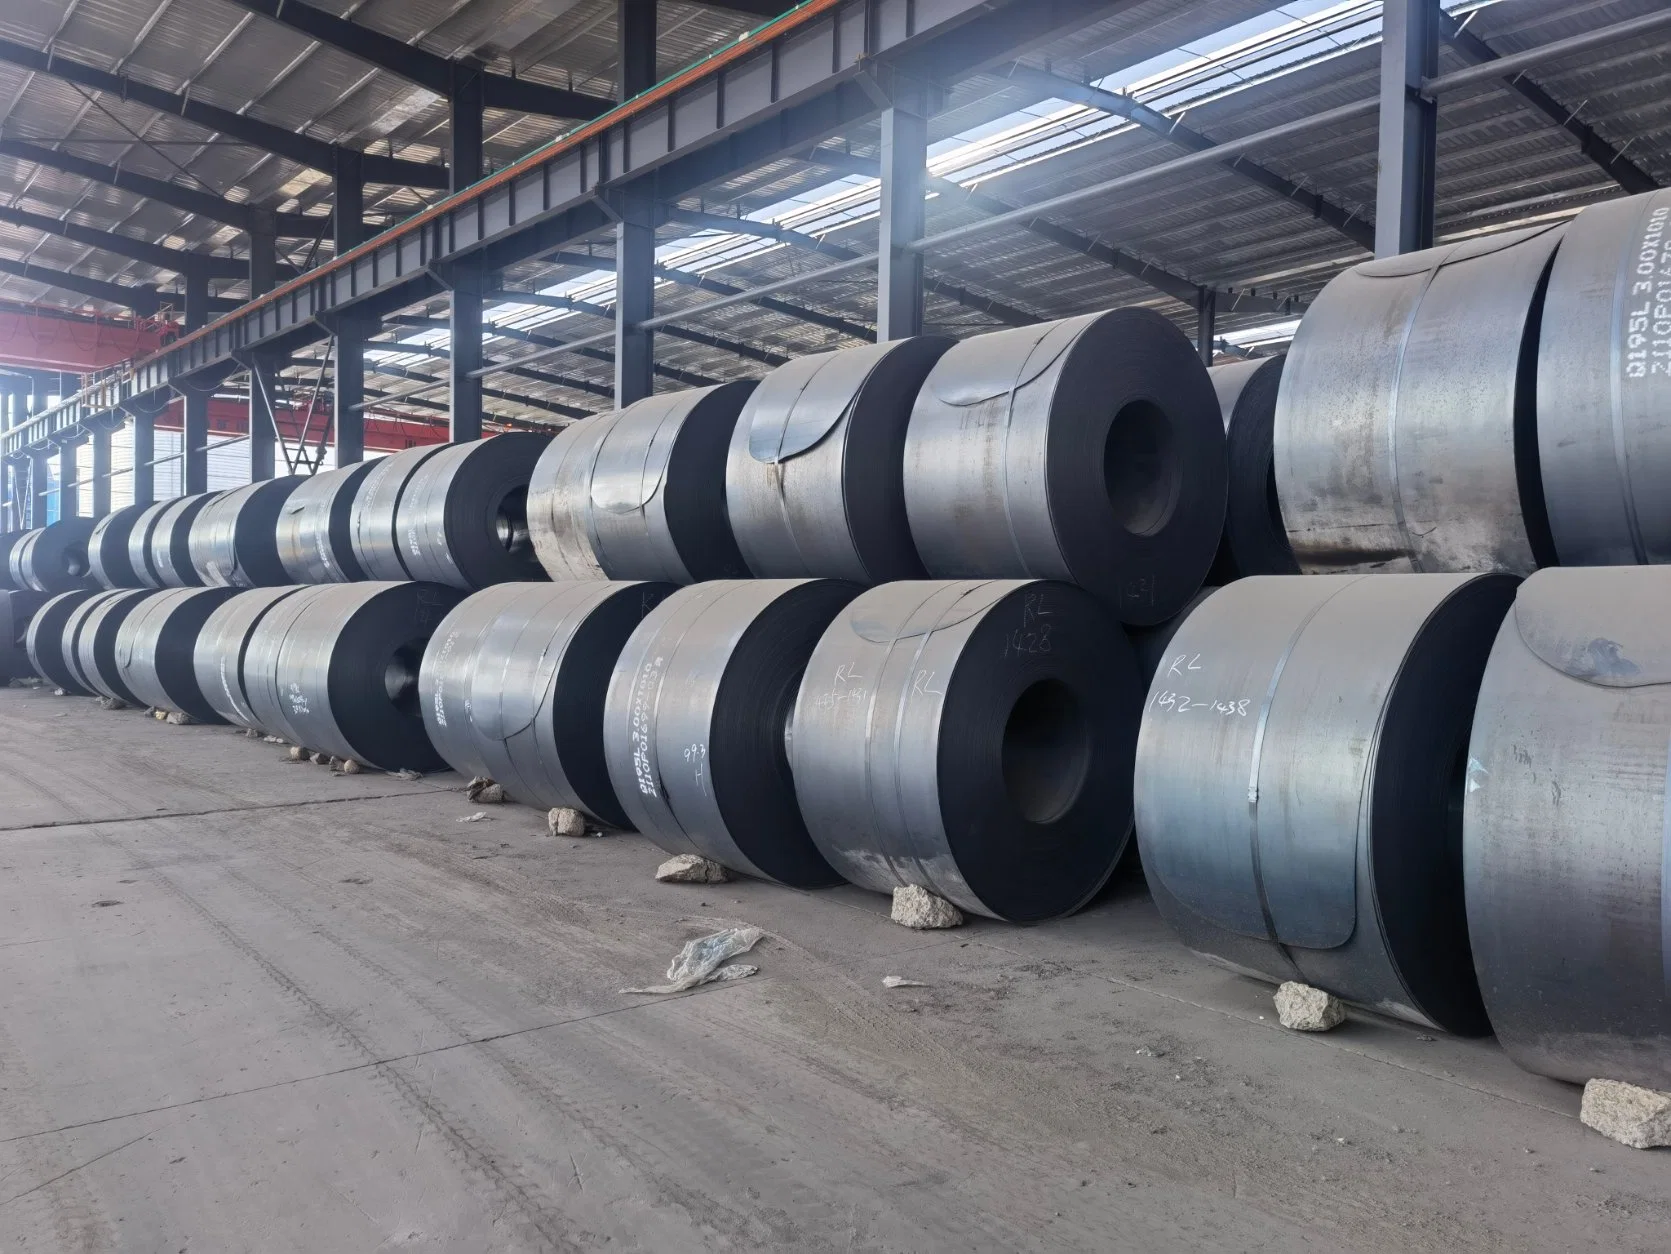 Mild Carbon Steel Ms Low Carbon Steel Hot/Cold Rolled Coil/Sheet/Pipe/Bar/Plate/Strip/Roll Bar/Profile carbon Steel for Building